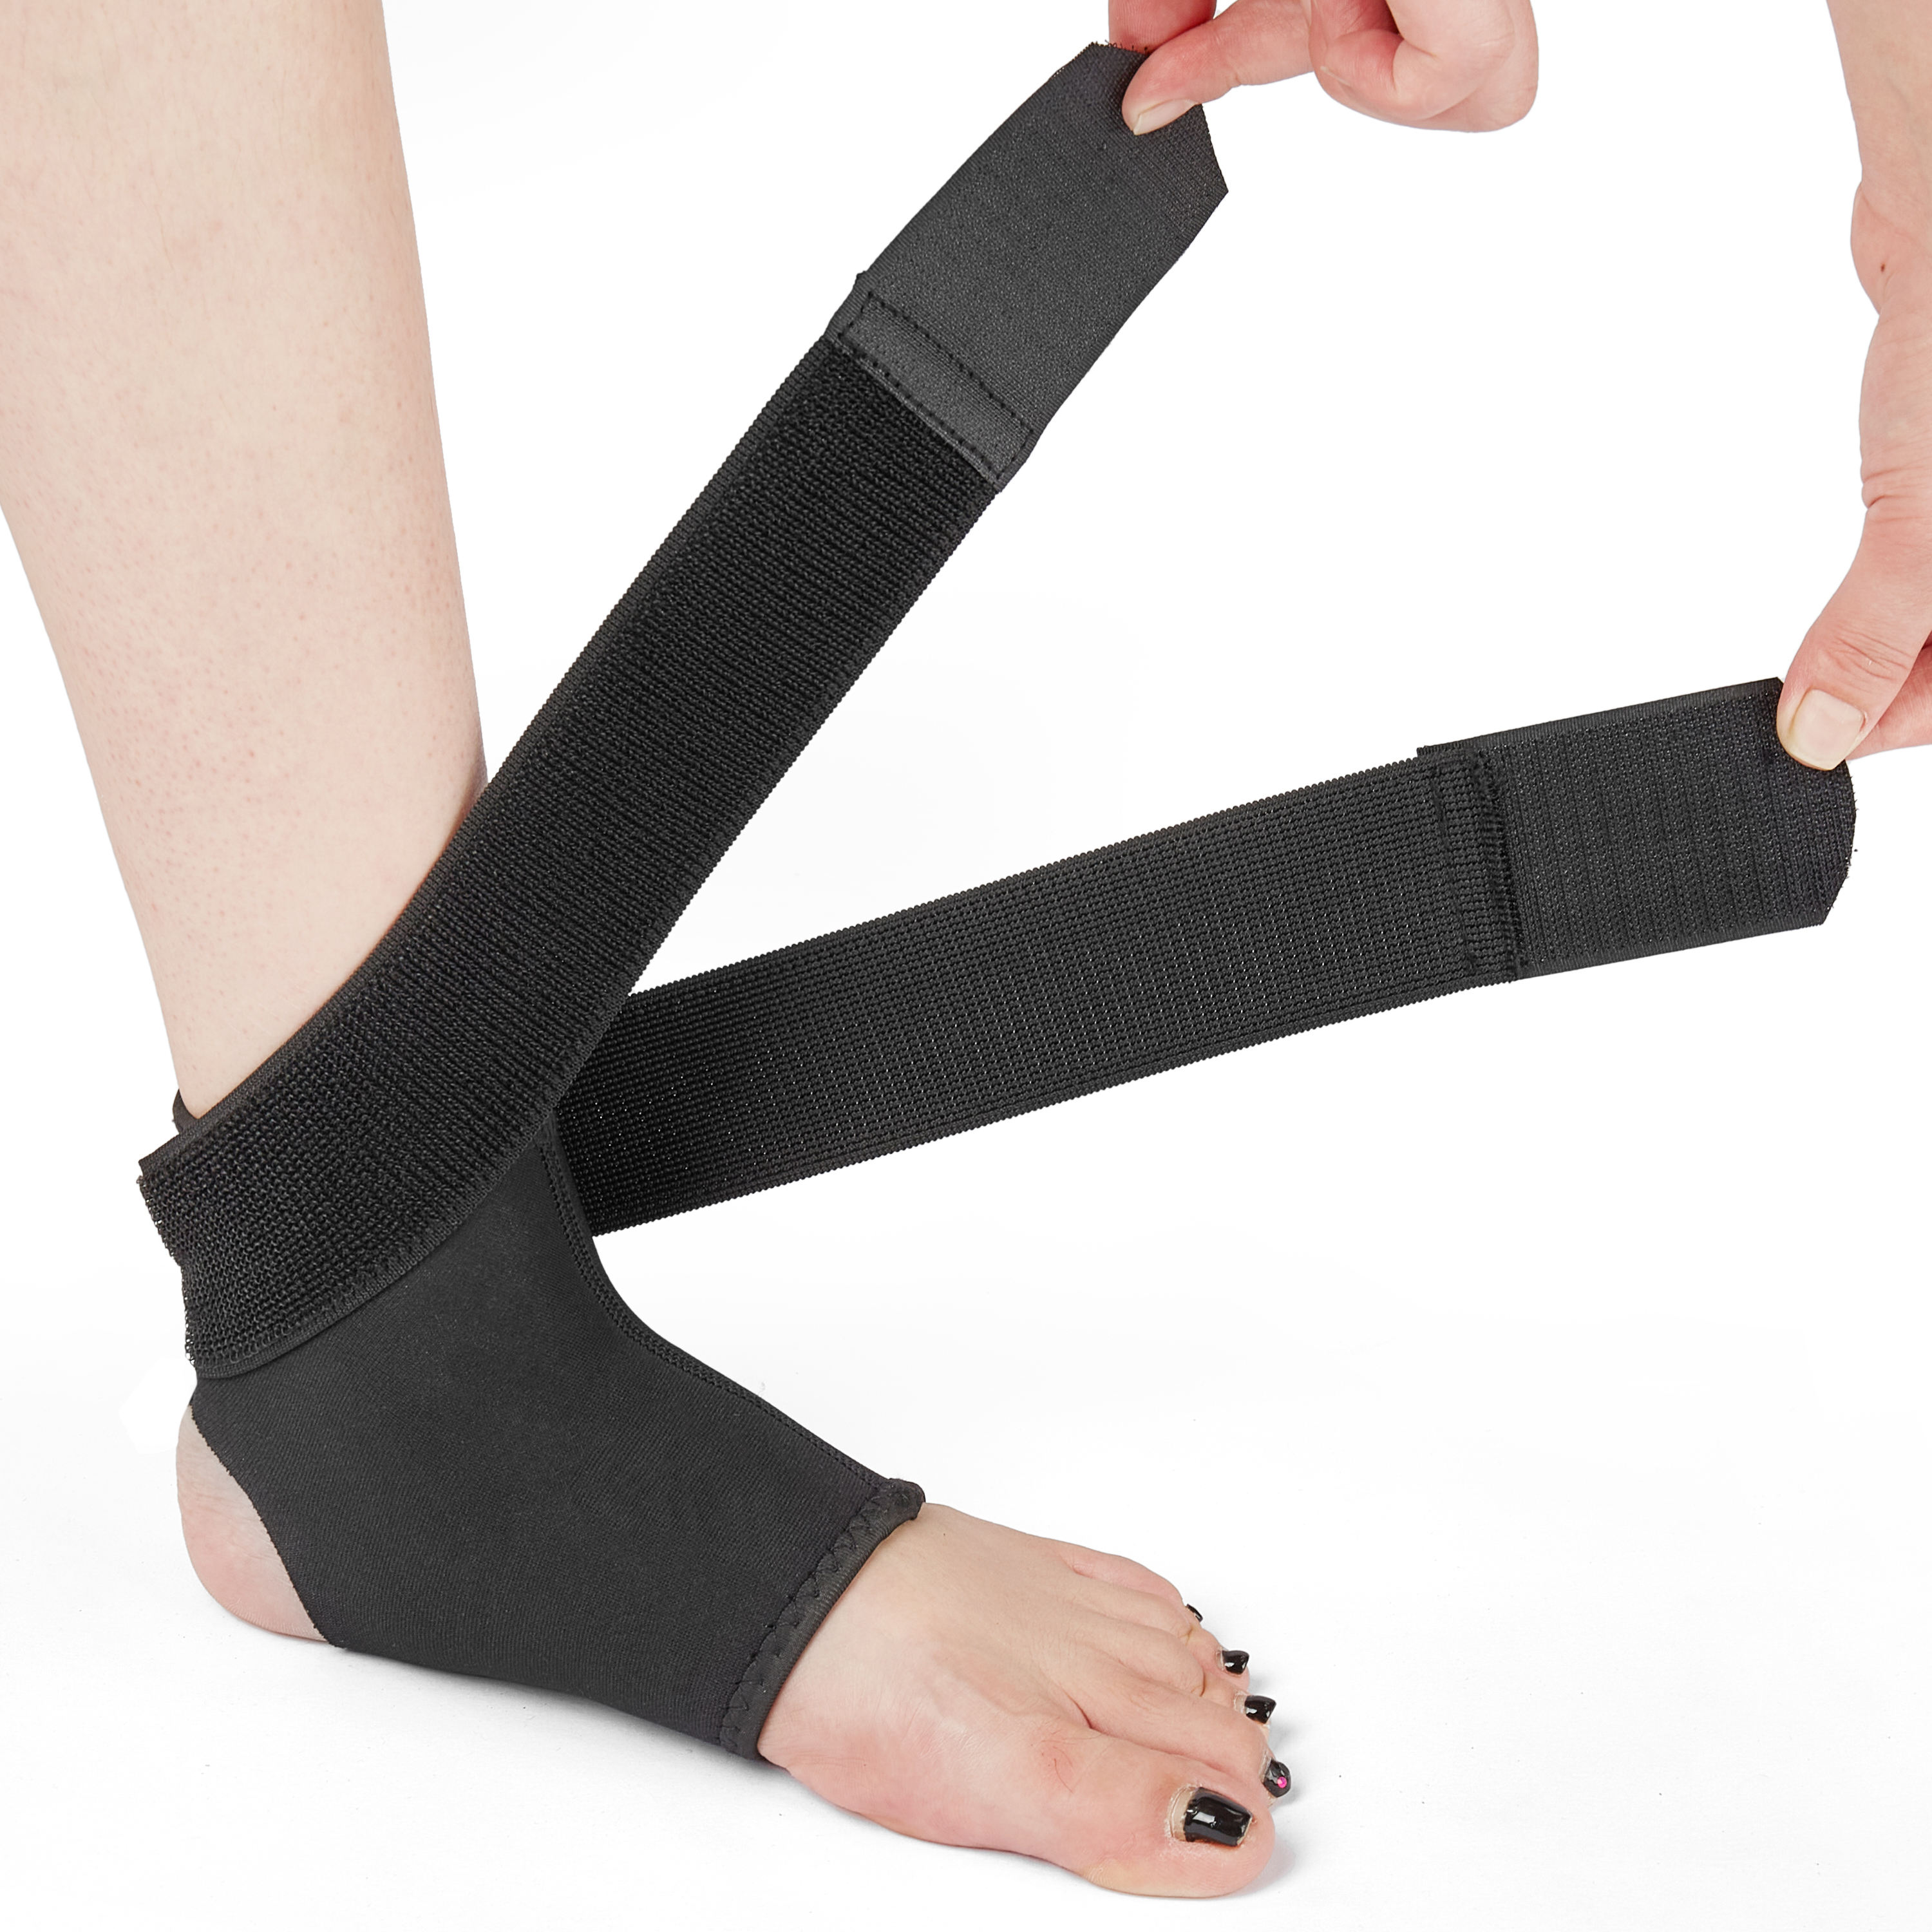 I-Ankle Guard-09